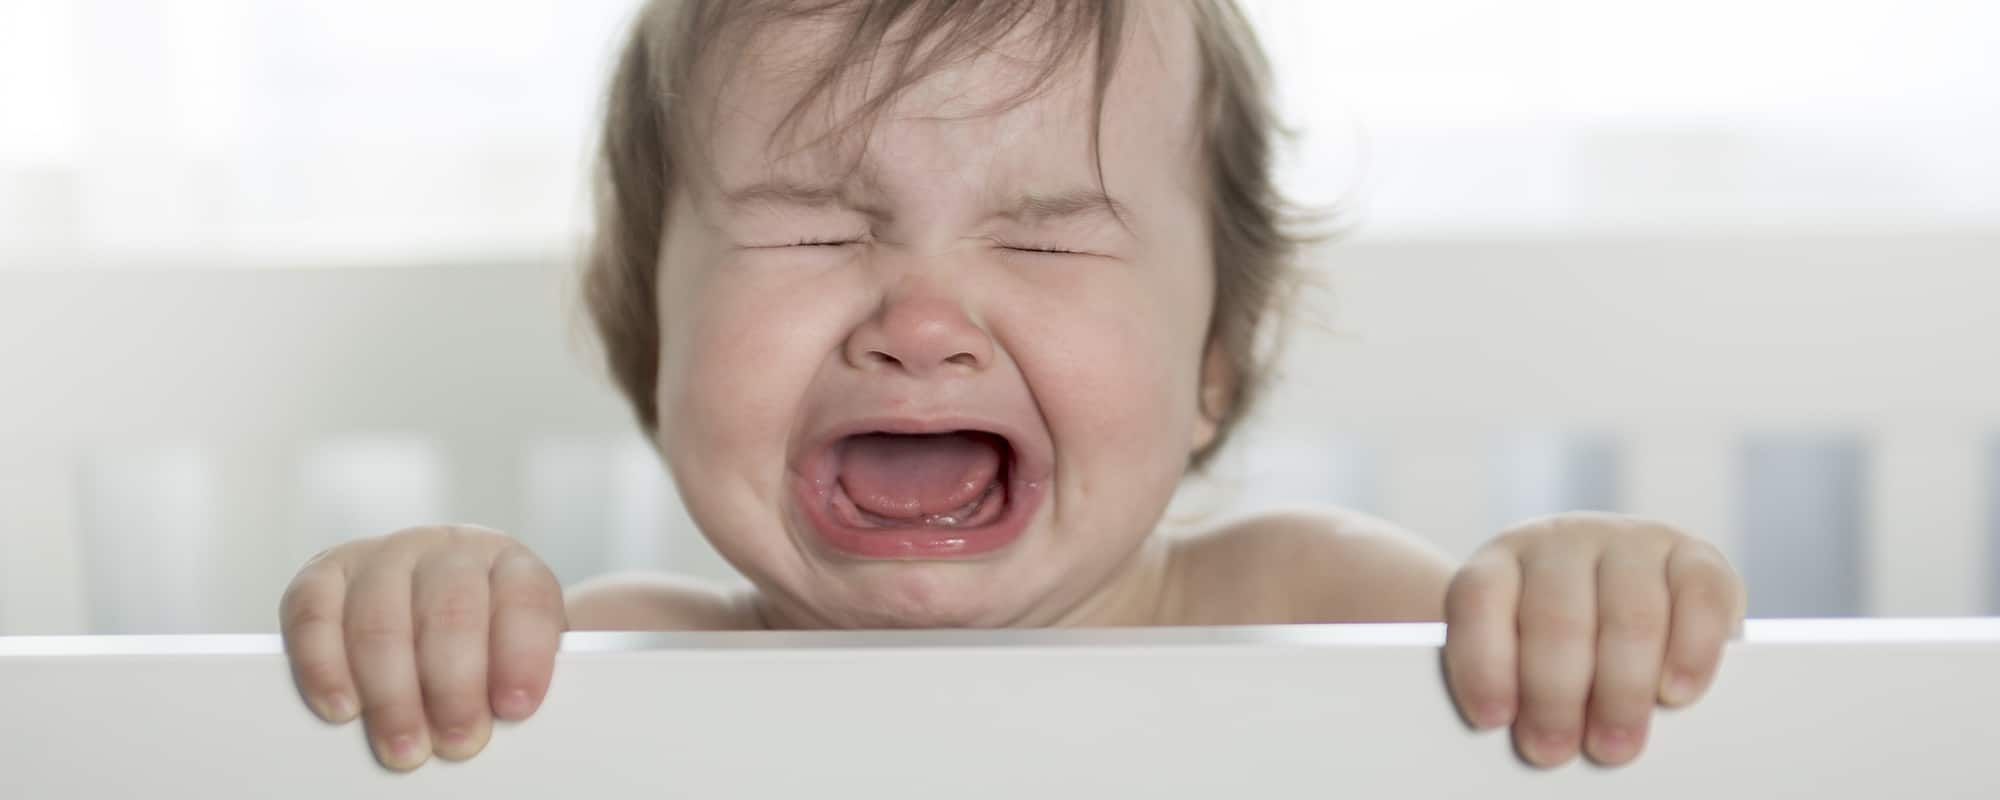 Understanding What Your Baby’s Cries Mean